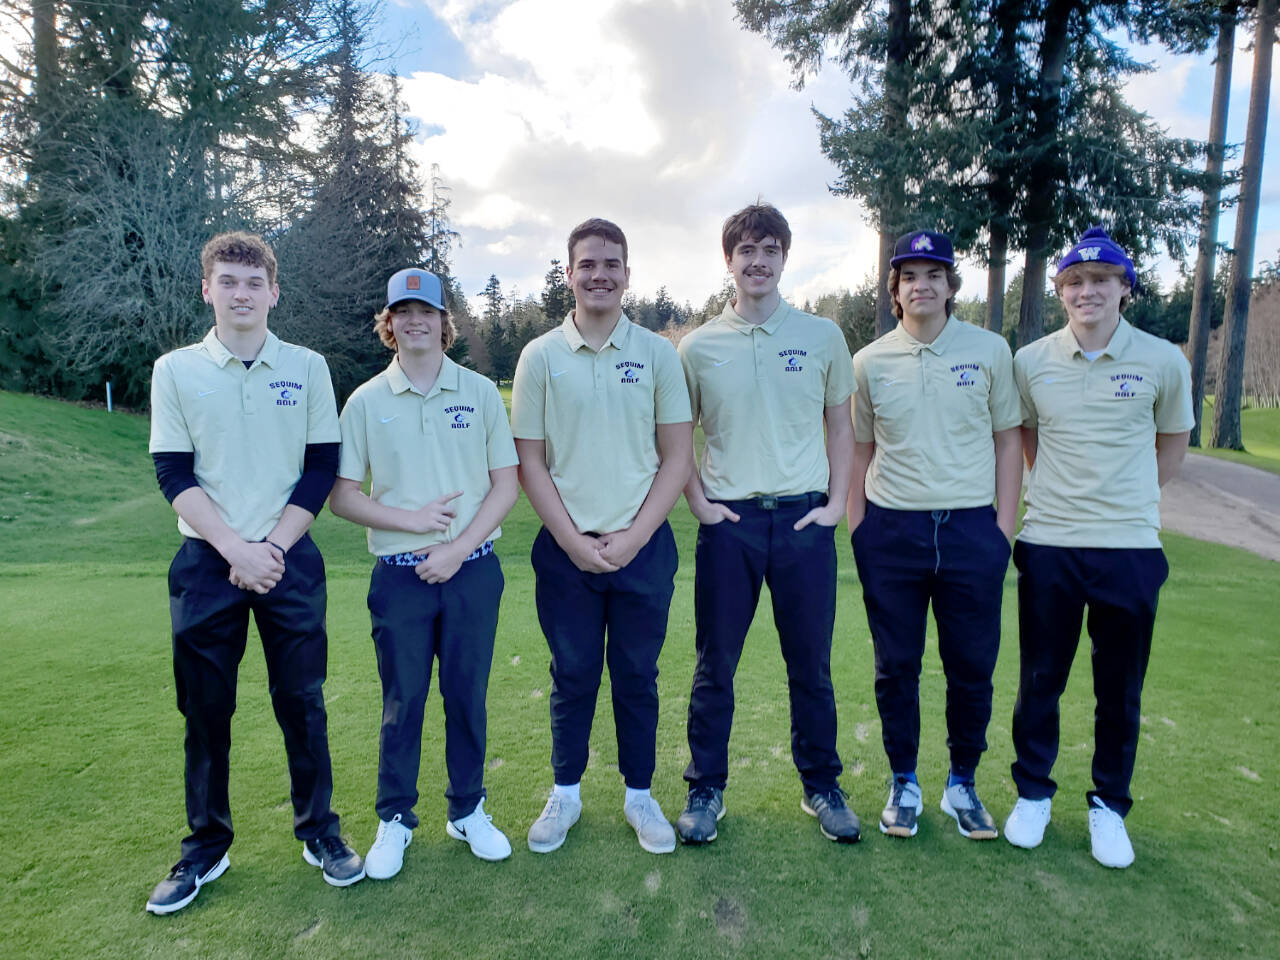 The Sequim boys golf team is the defending Olympic League state champion. The boys won their first match of the year last weekend. From left are Dominic Riccobene, Ben Sweet, Pryce Glasser, Cole Smithson, Lars Wiker and Zack Thompson. (Photo courtesy of Sean O'Mera)